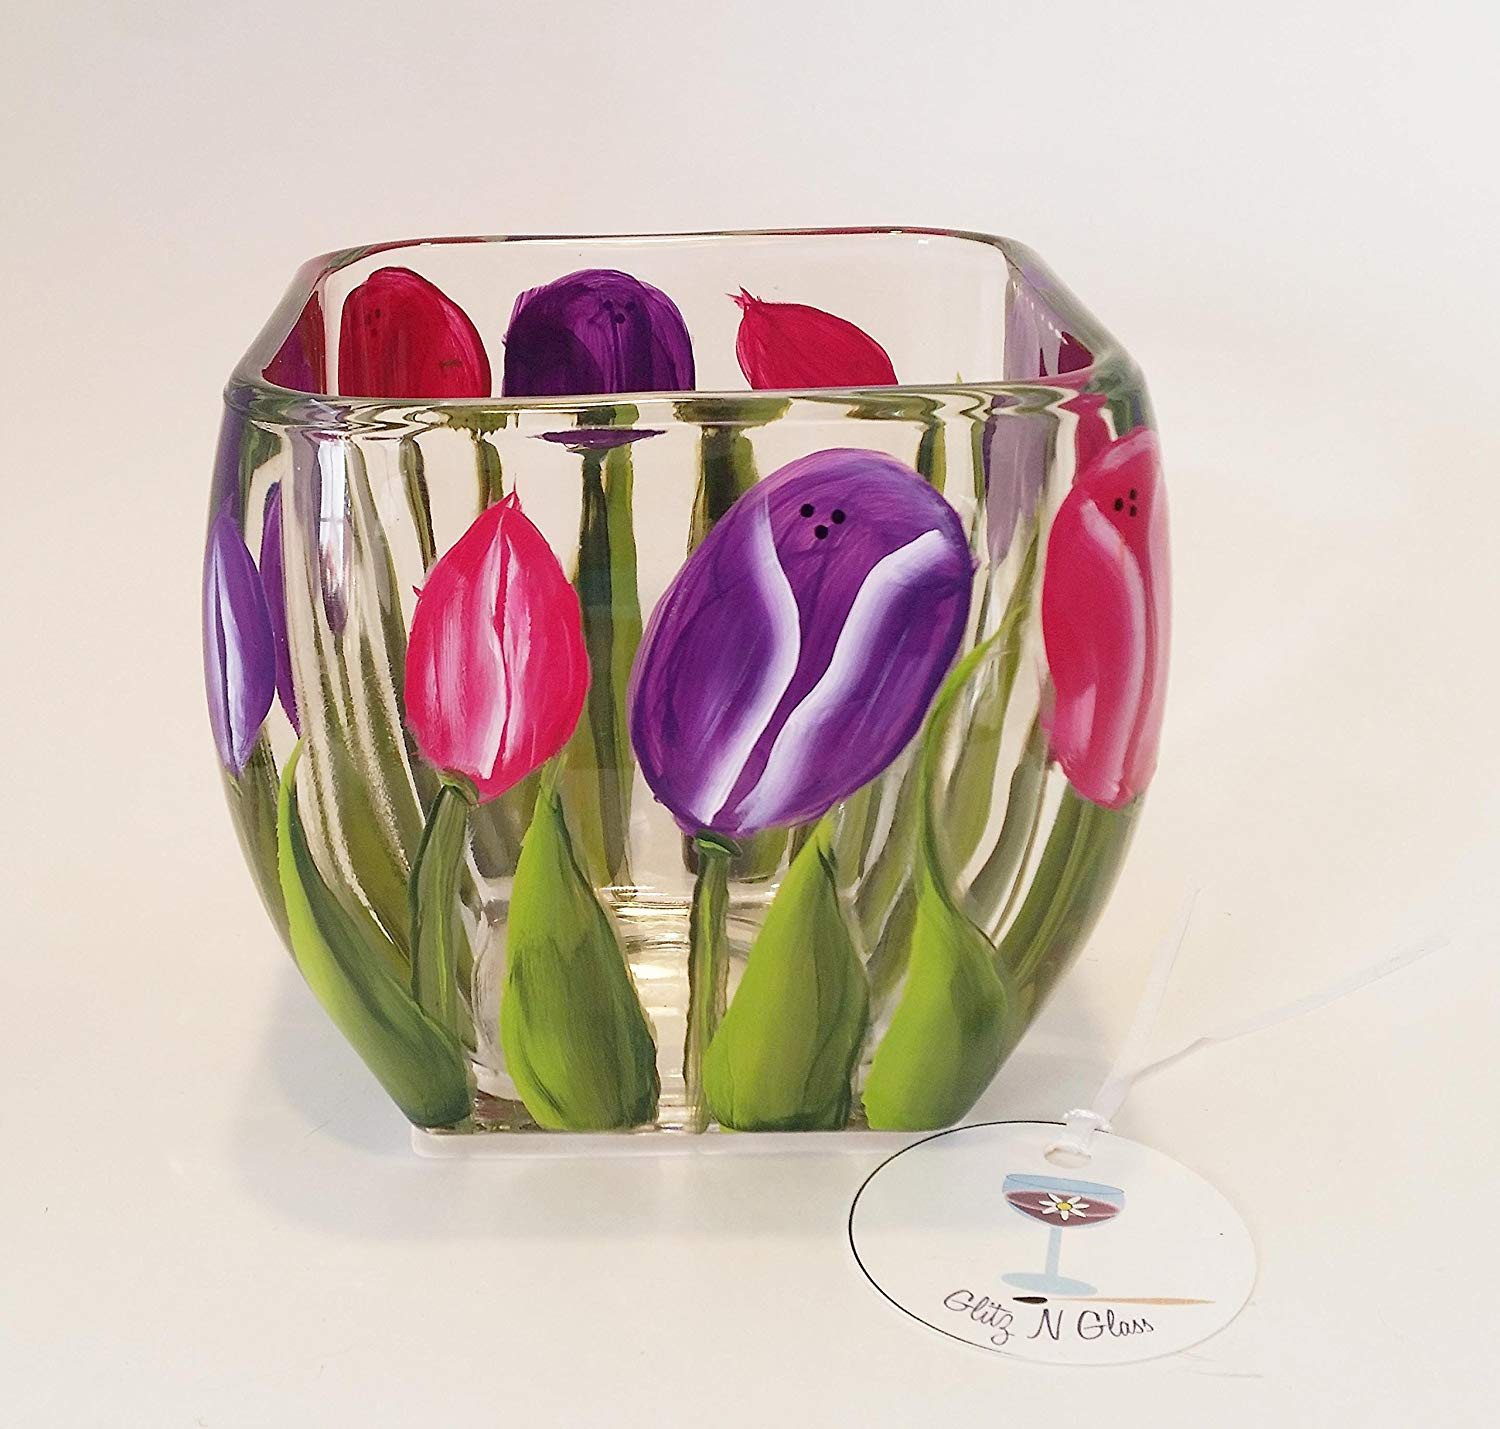 29 Recommended Red Glass Vases and Bowls 2022 free download red glass vases and bowls of amazon com hand painted glass square bowl pink and purple tulips throughout amazon com hand painted glass square bowl pink and purple tulips handmade